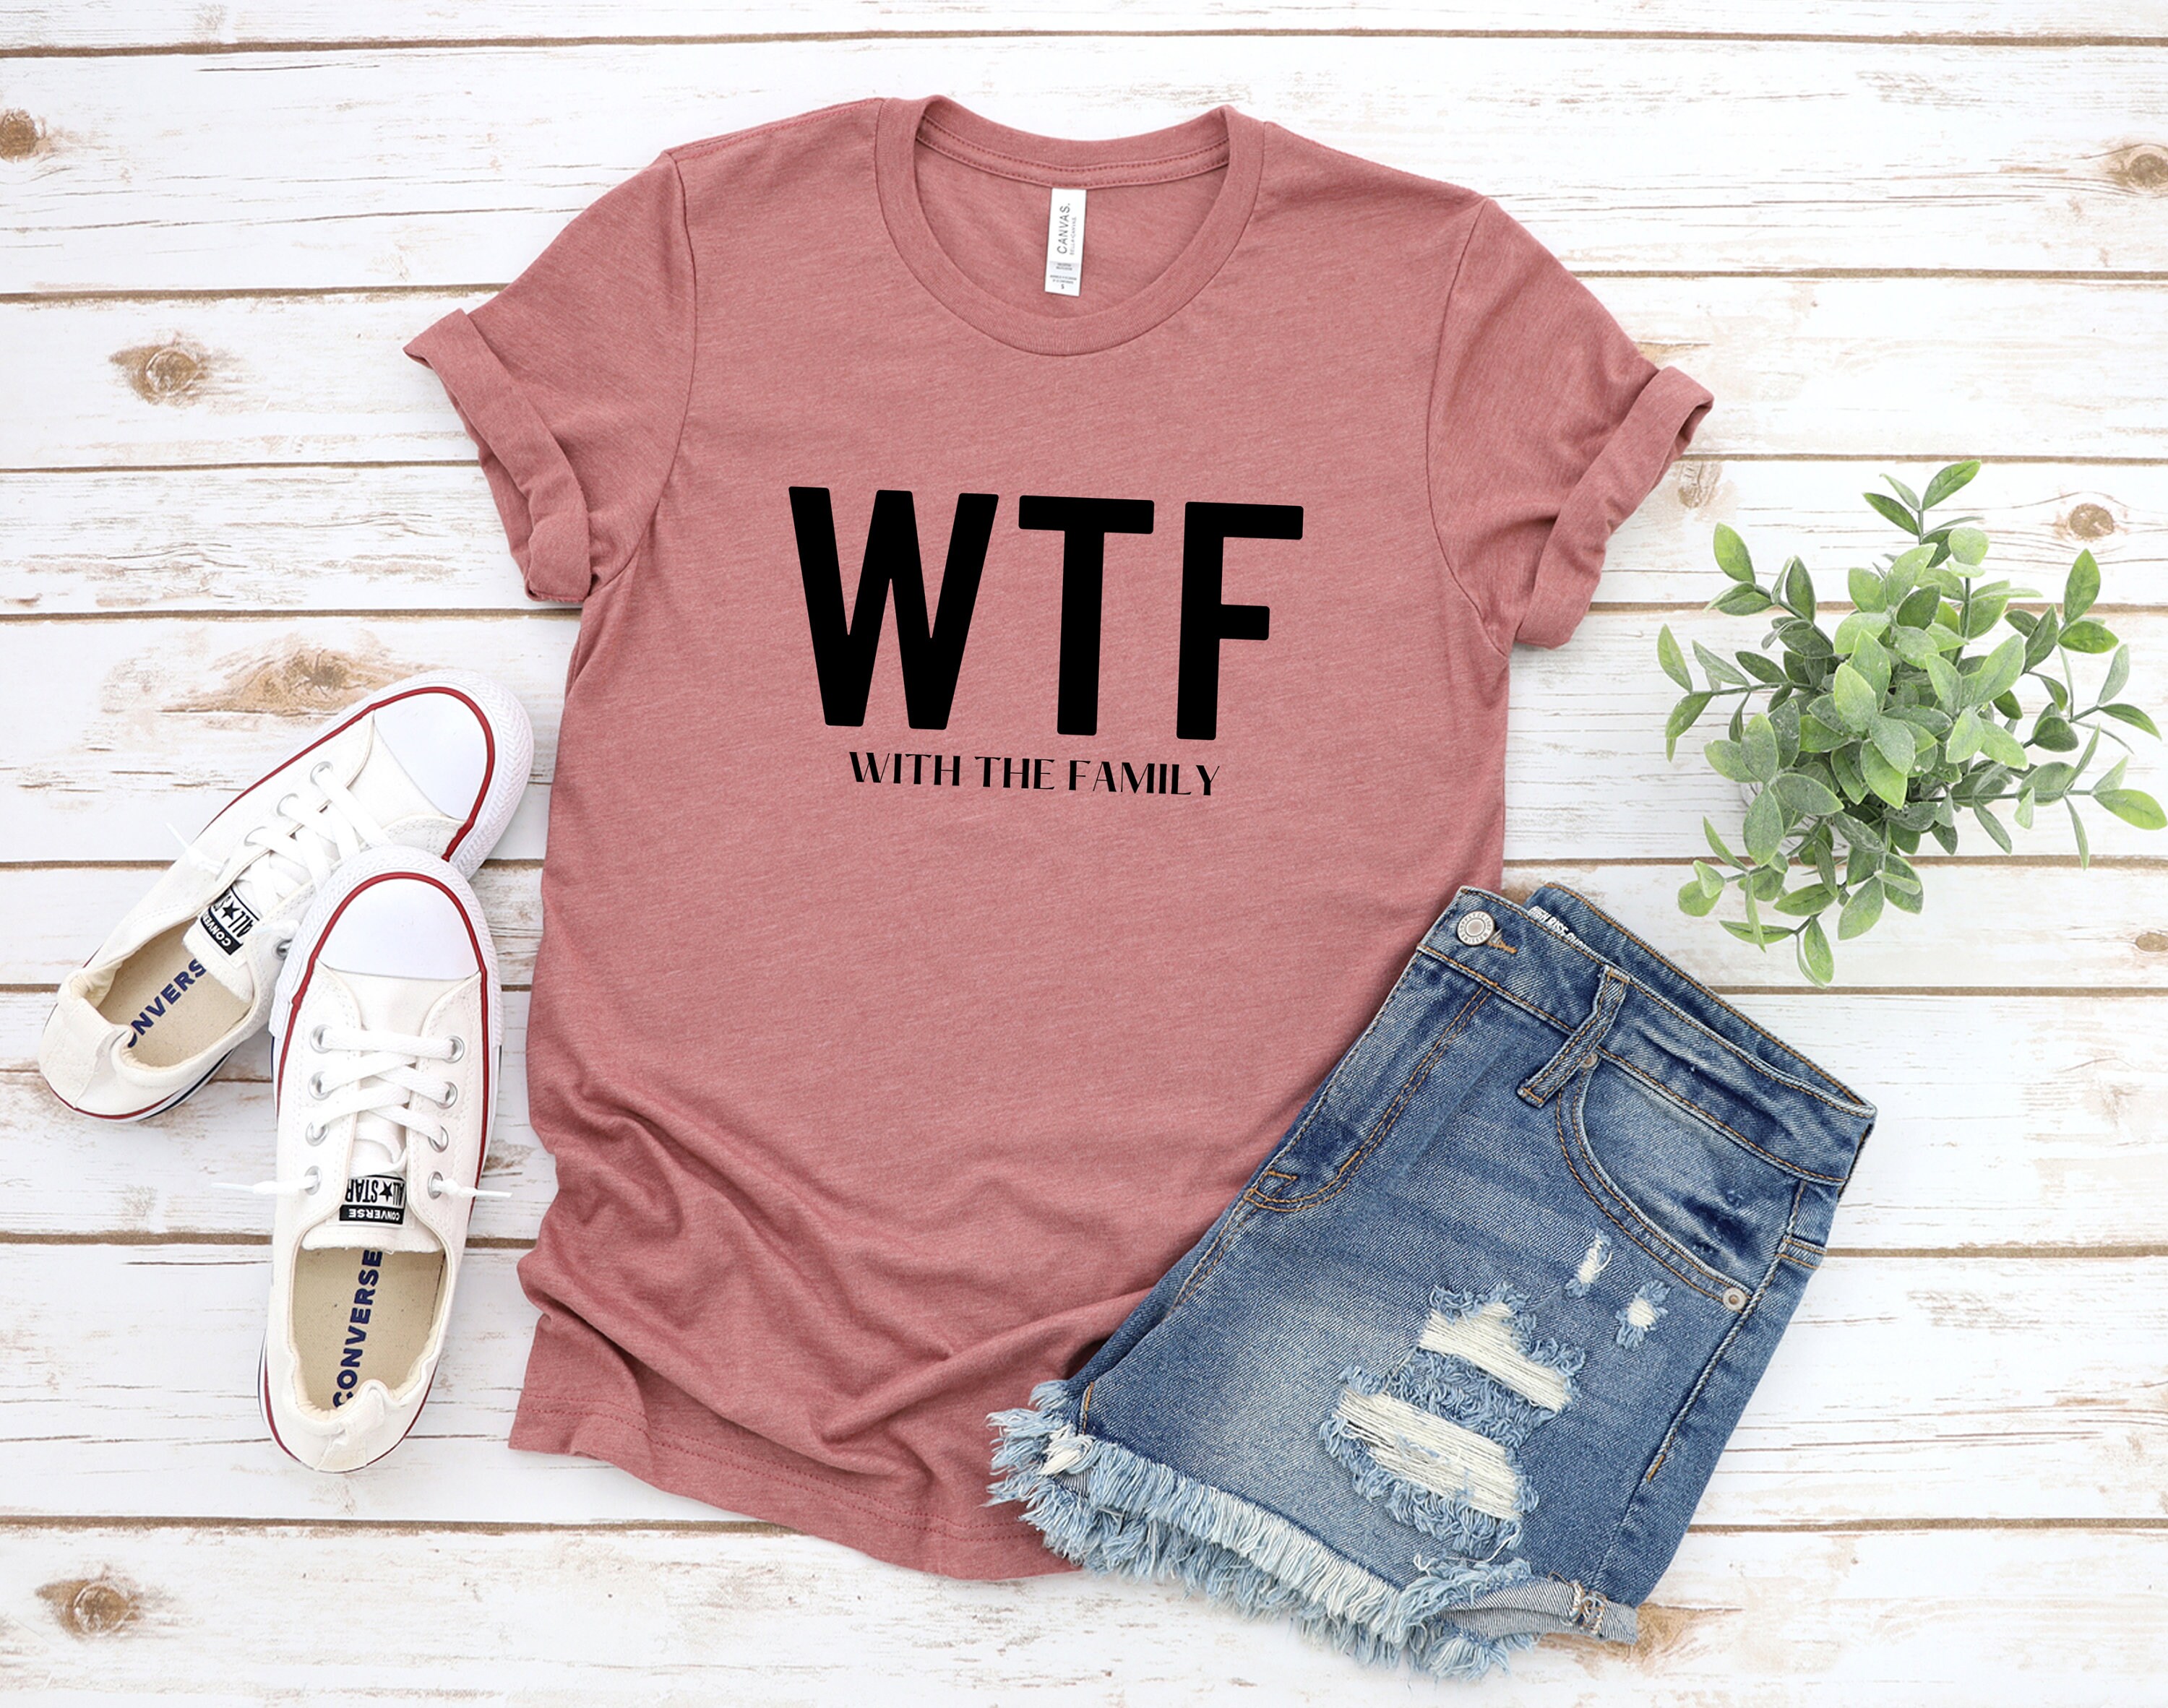 WTF With the Family Unisex T-shirt Mom Shirts Shirts for - Etsy